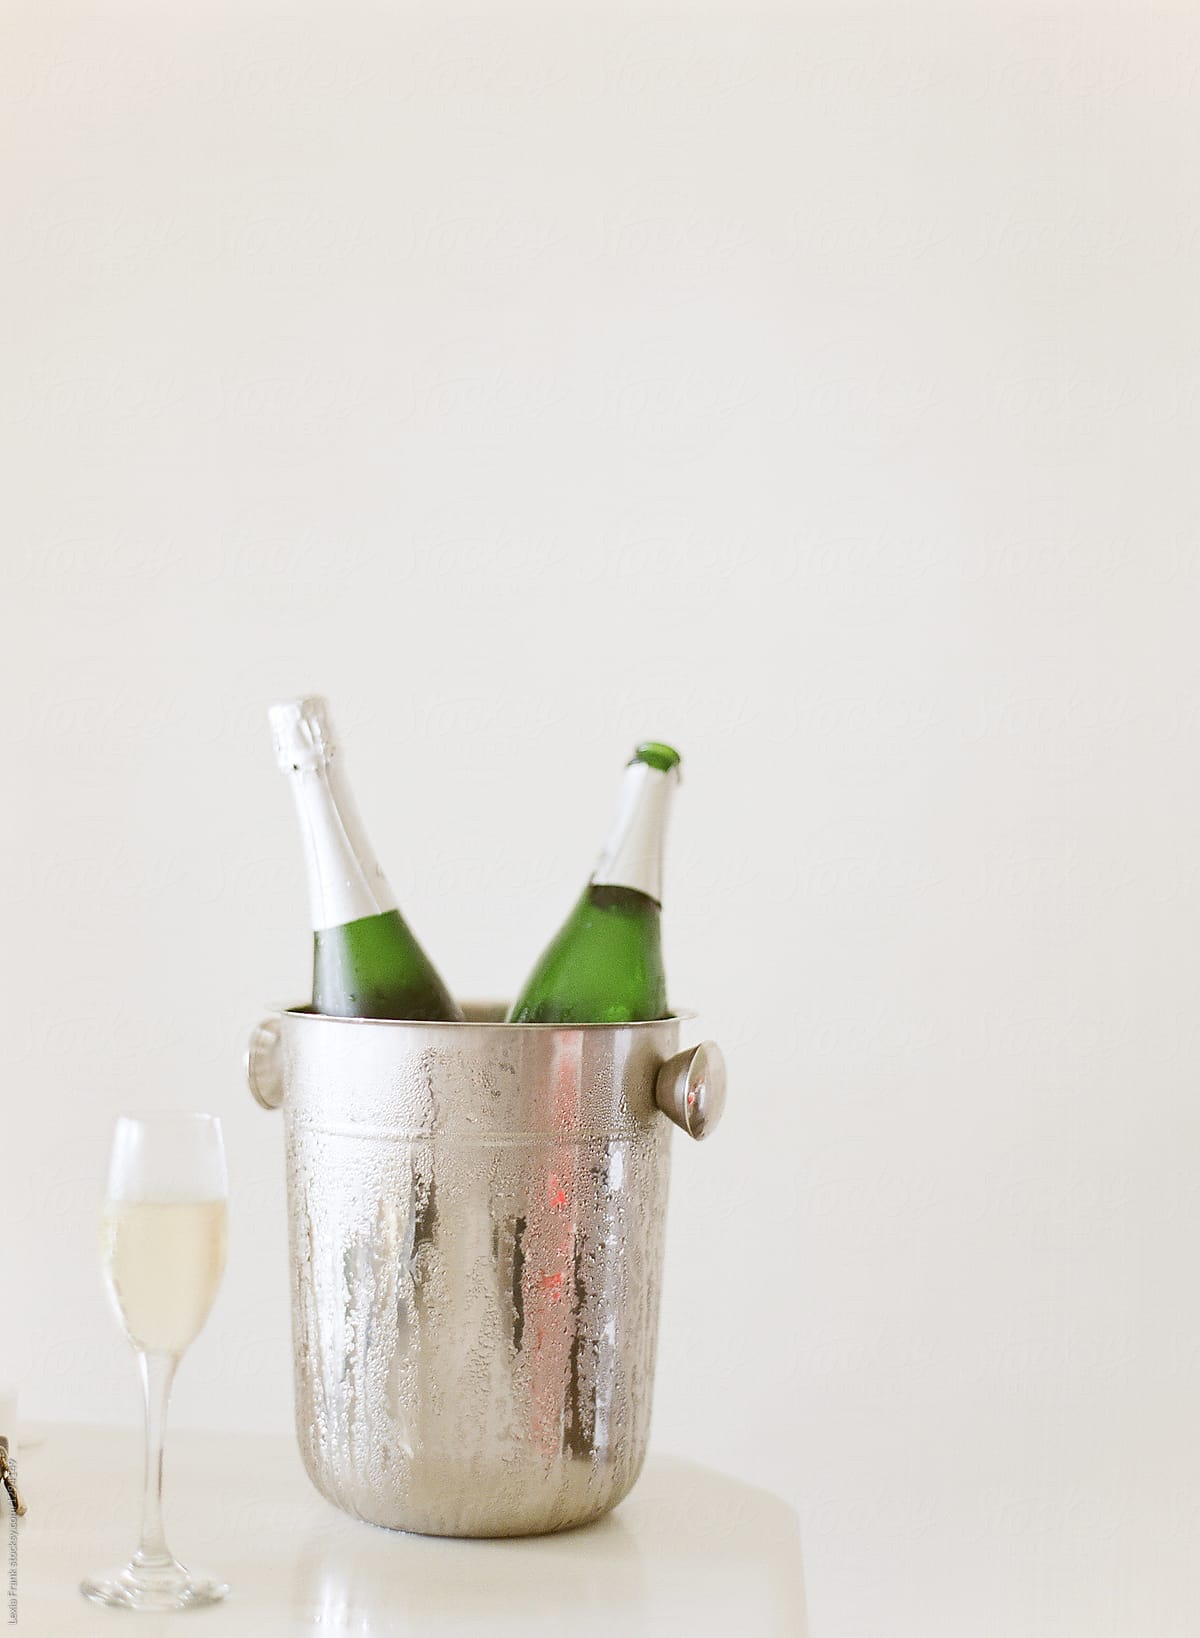 champagne bottles chilling with white background and negative space